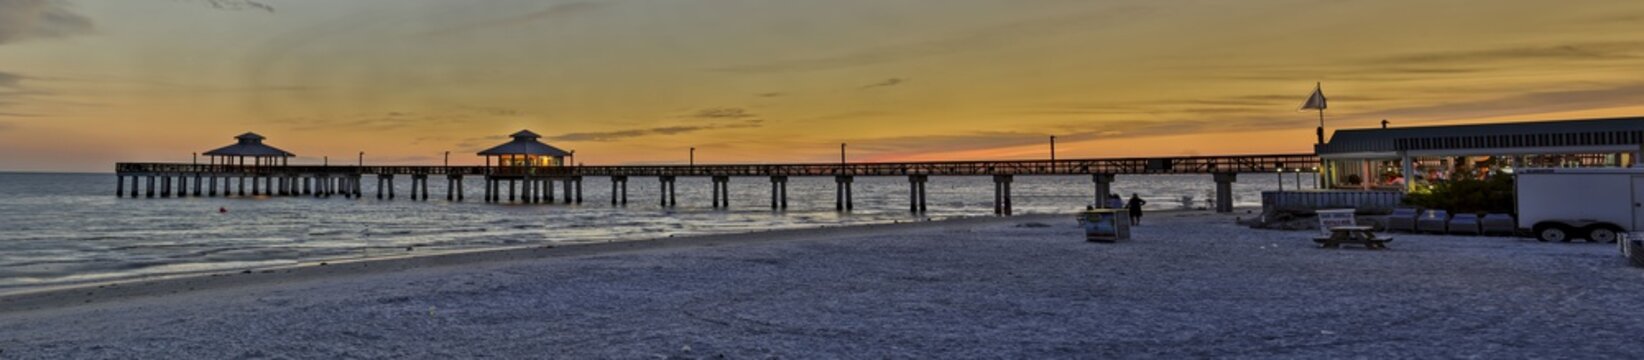 Panoramic picture of Fort Myers fishing pier at sunrise with afterglow